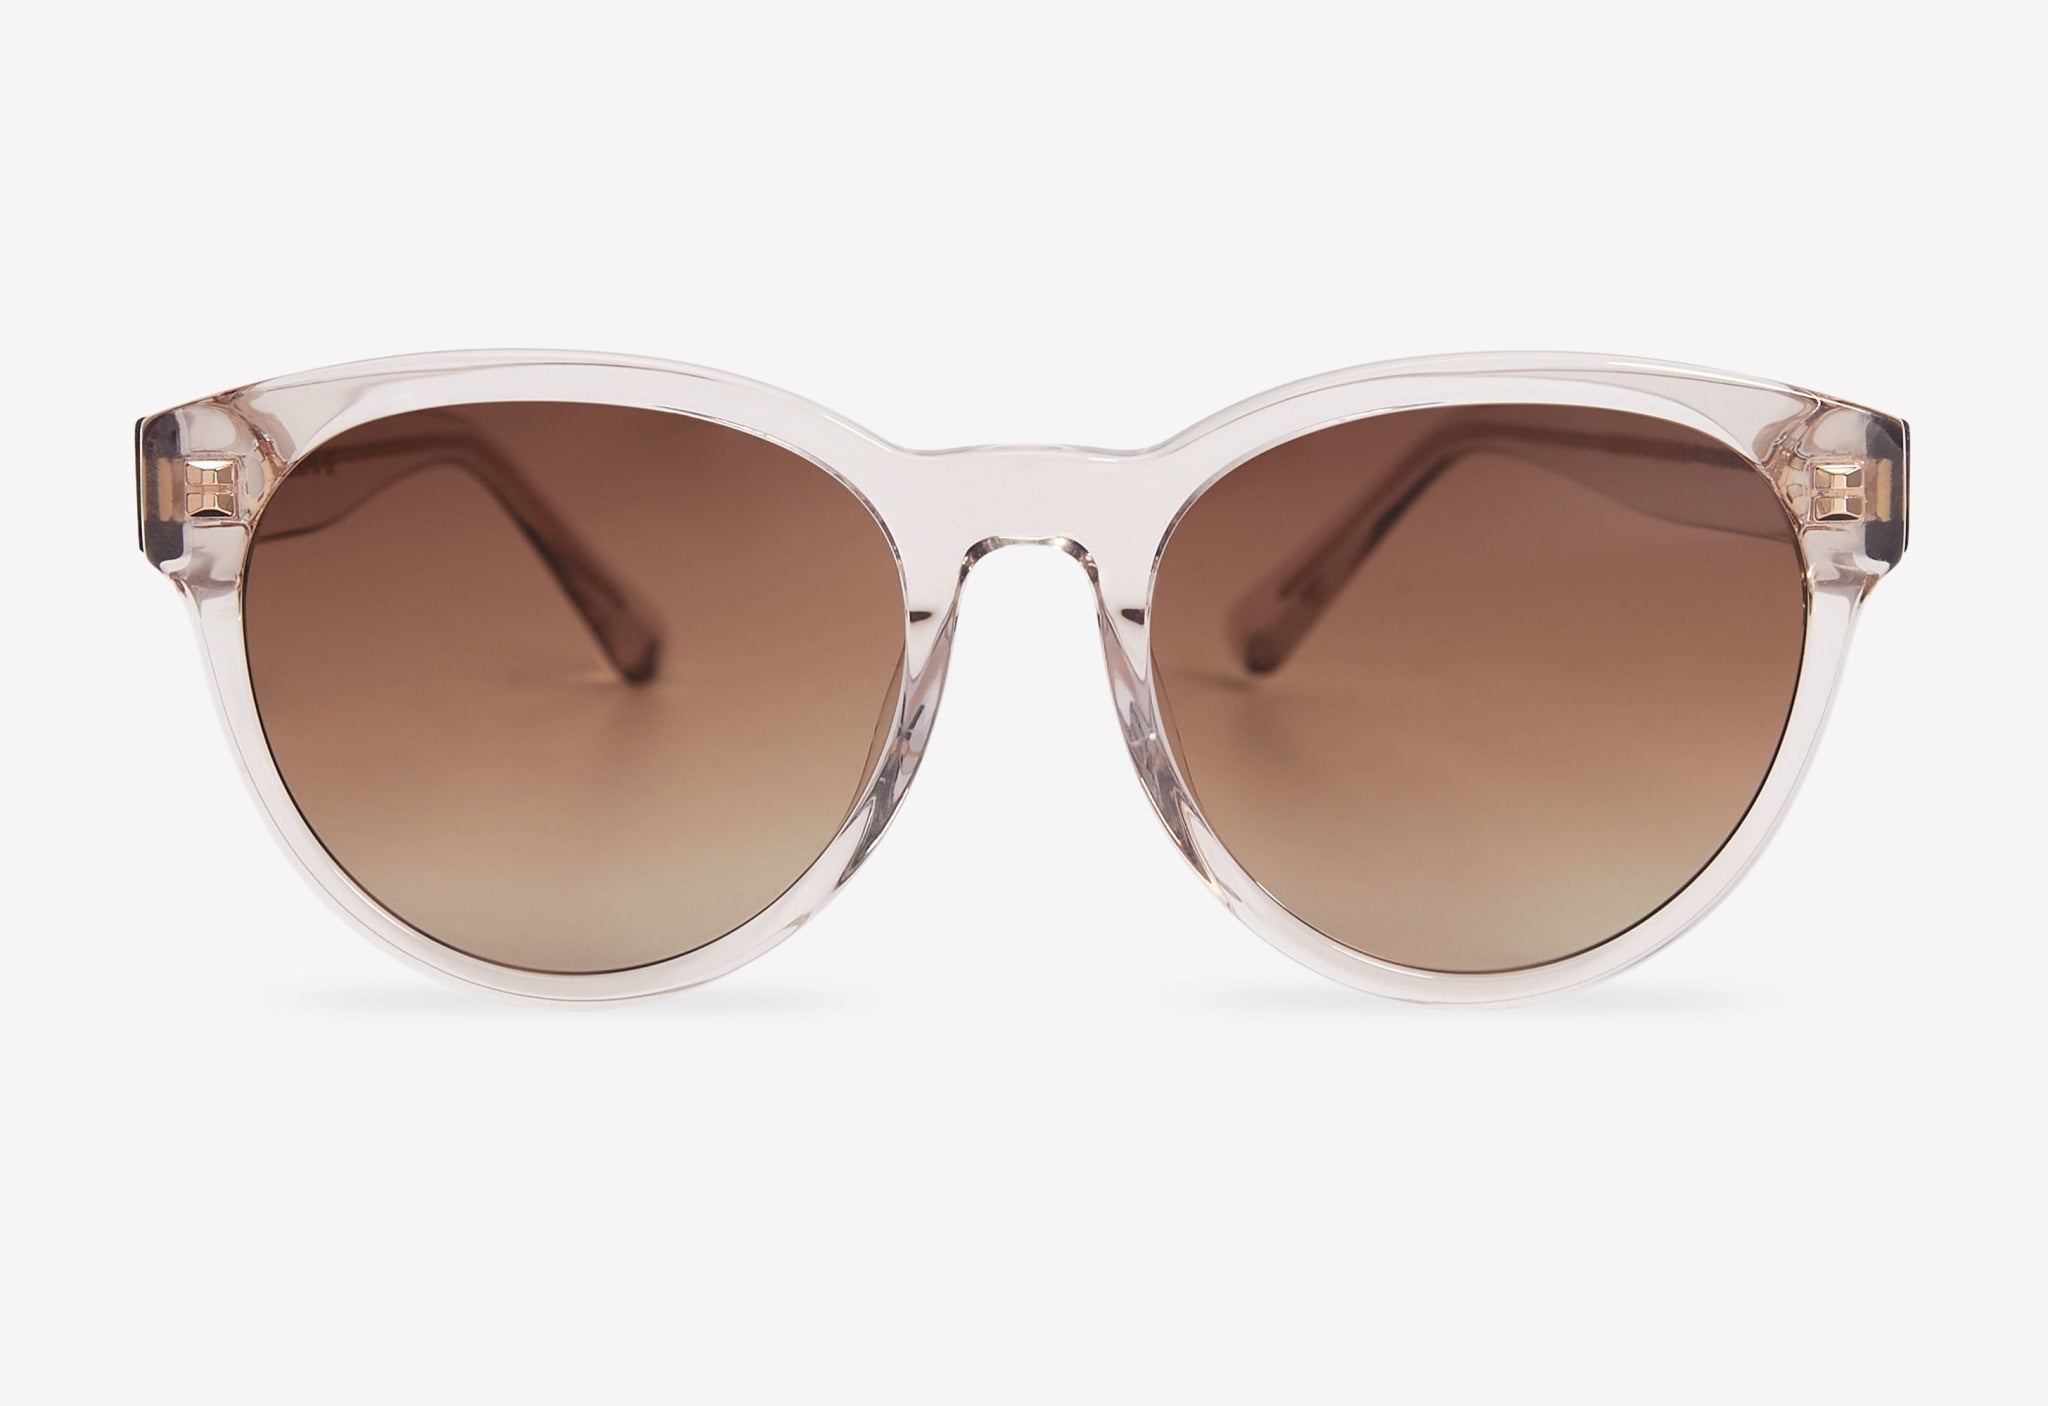 Oversized design sunglasses with brown lens| MessyWeekend